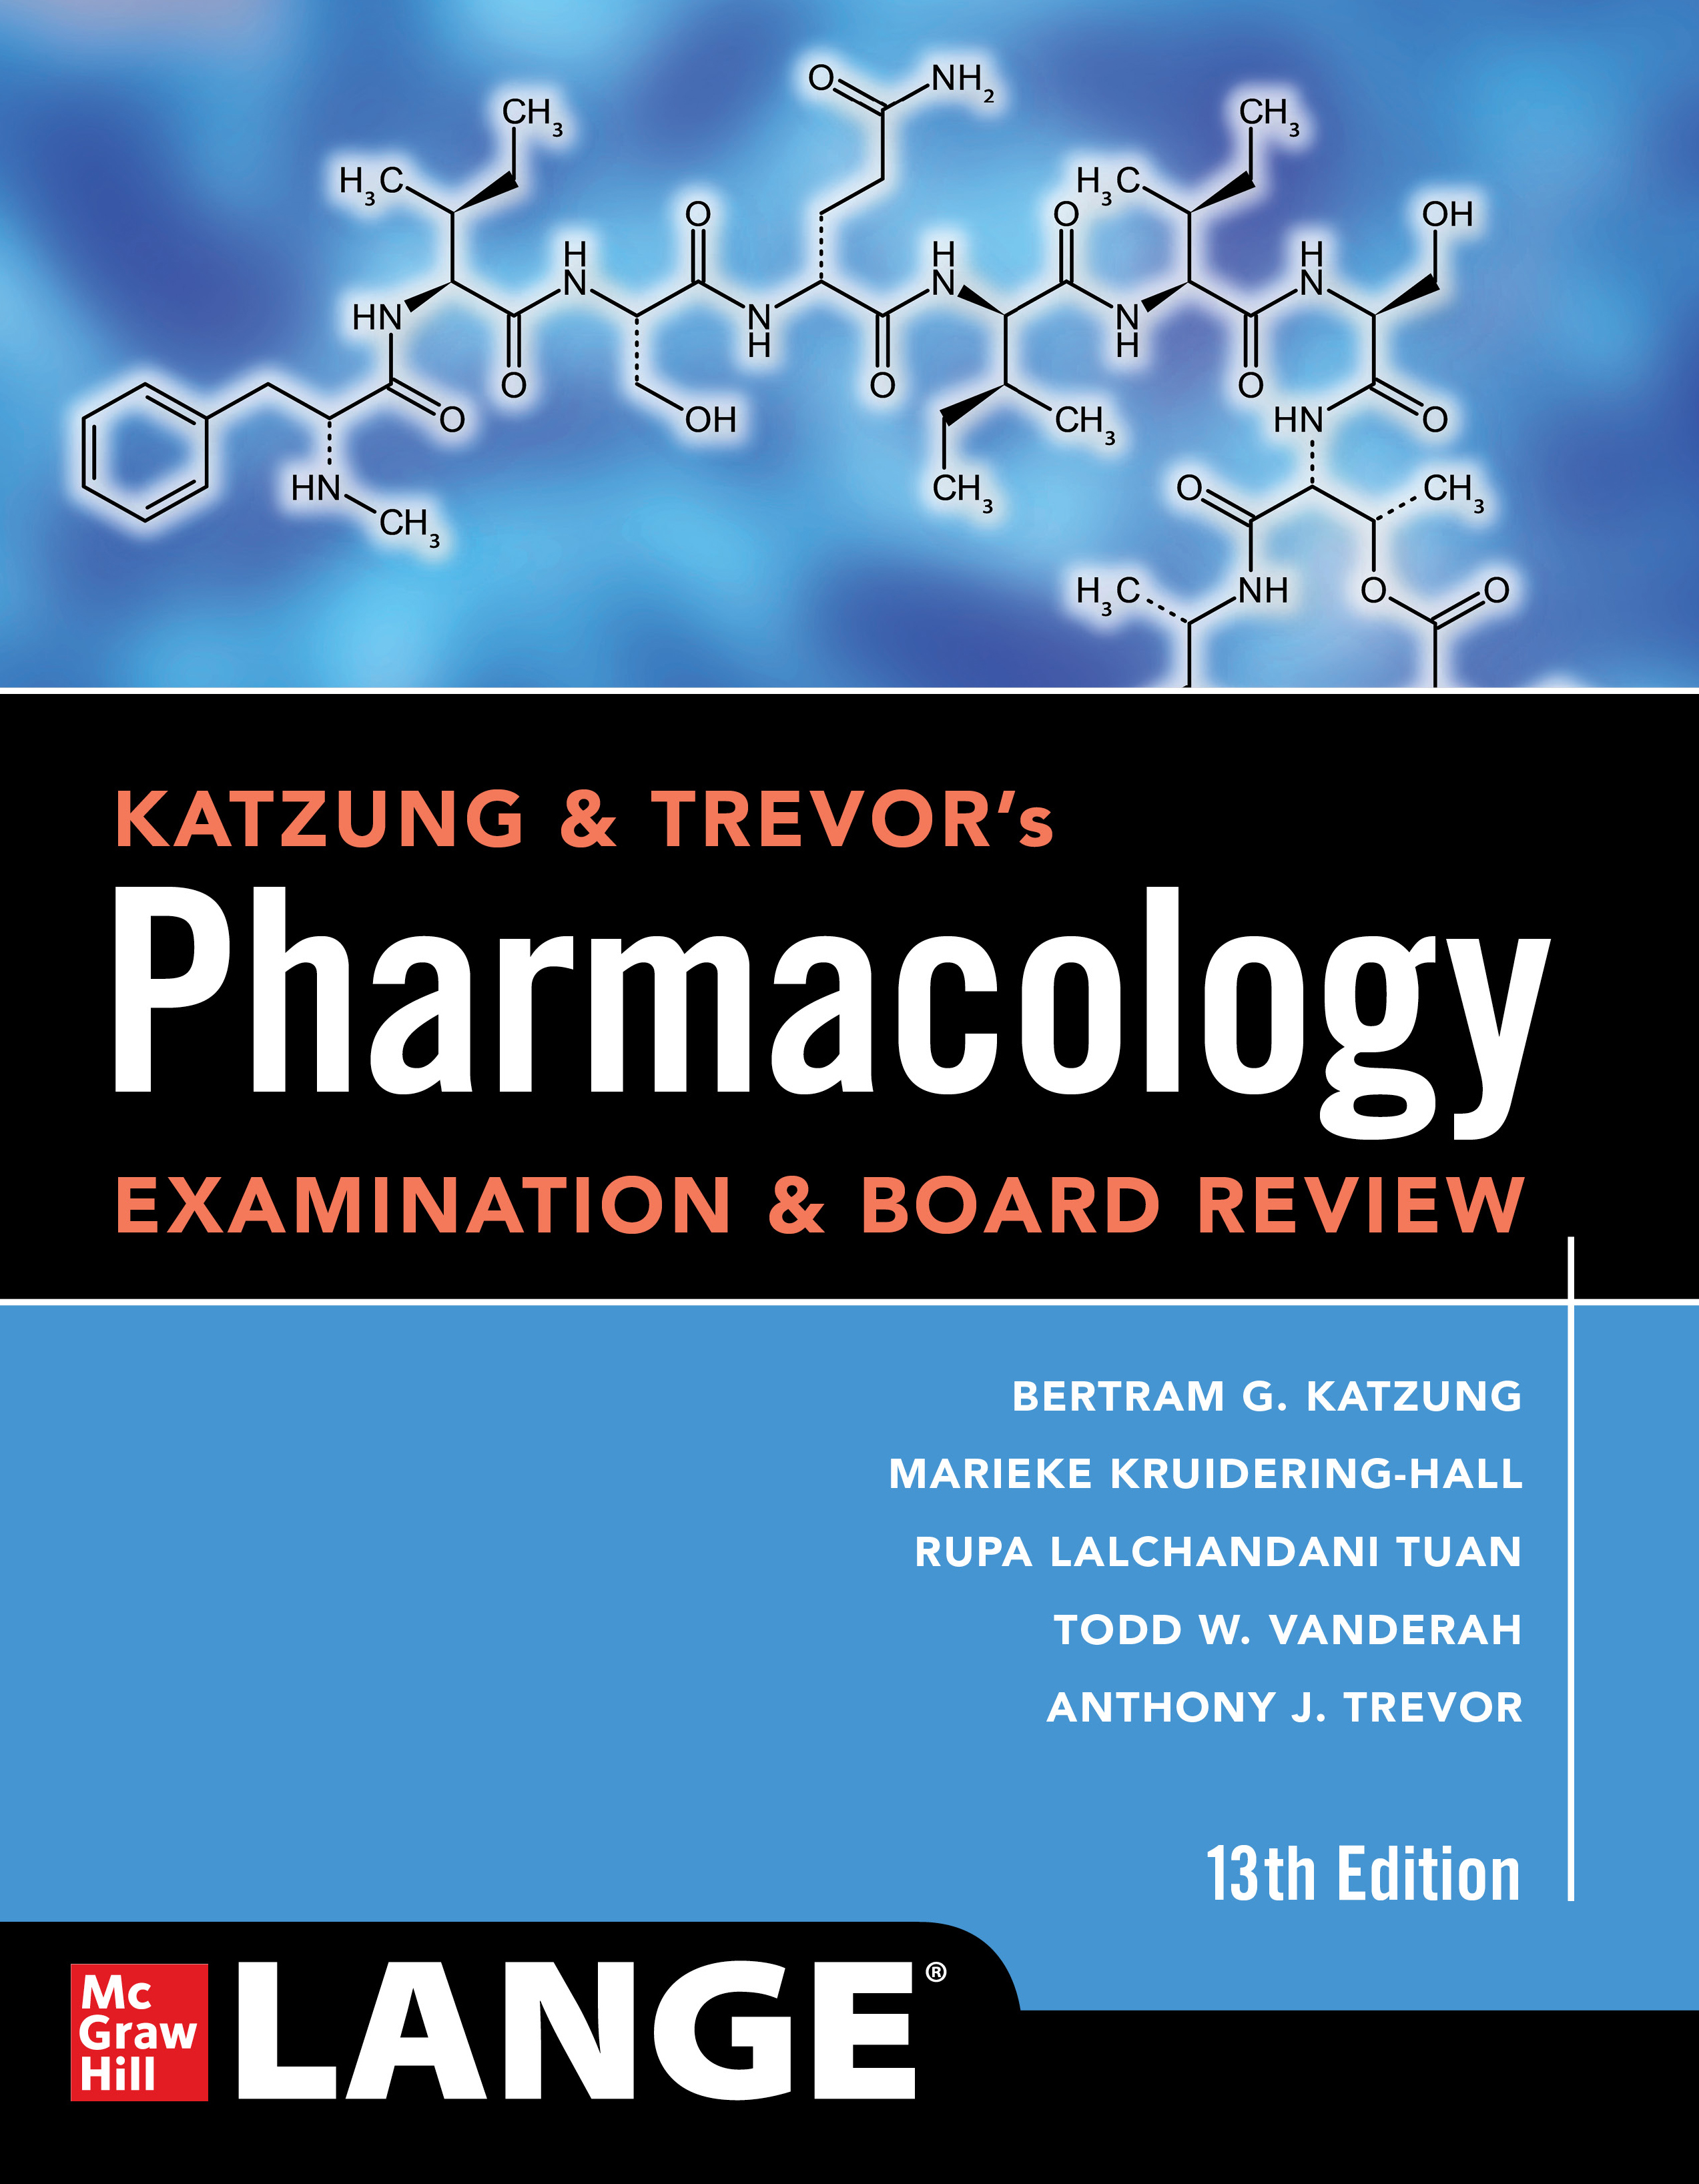 Katzung & Trevor's Pharmacology Examination and Board Review, Thirteenth Edition - 50-99.99